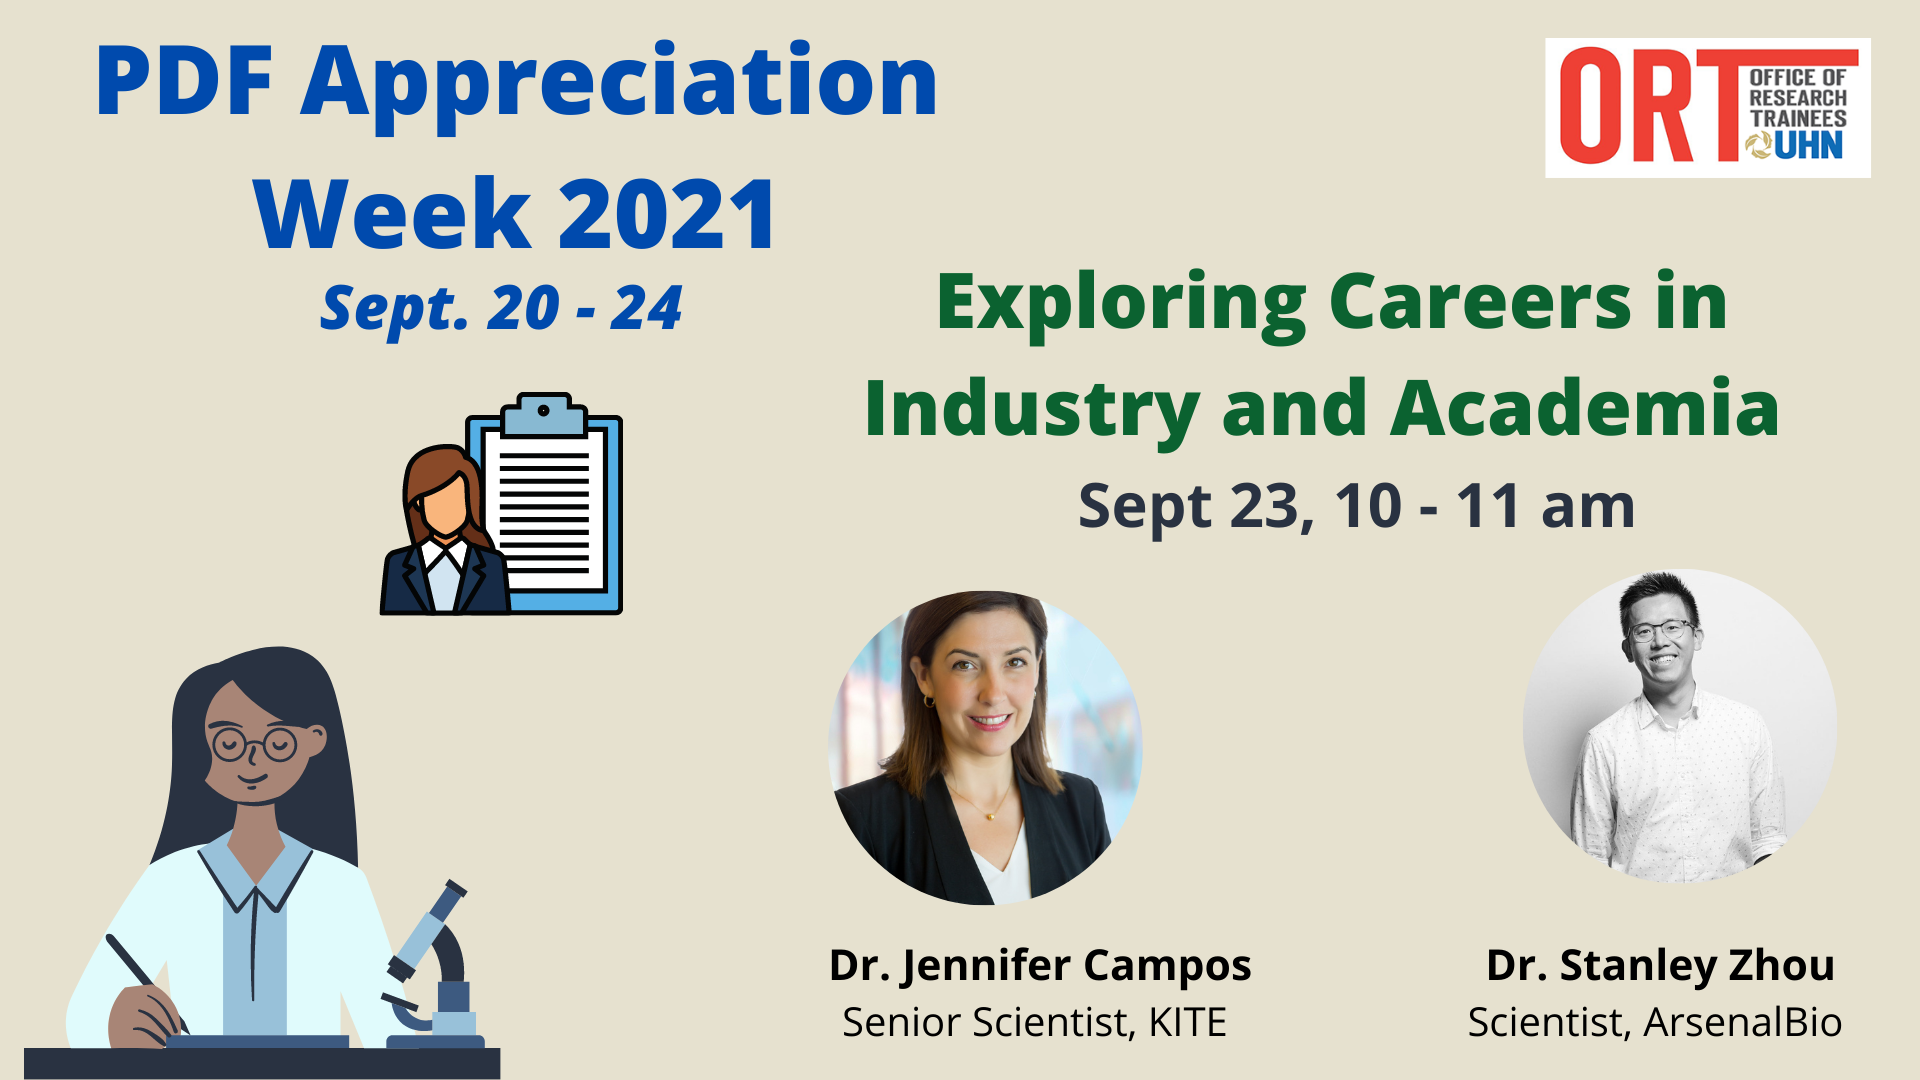 A PDF Appreciation Week 2021 Poster. Exploring Careers in Industry and Academia. Sept 23, 10-11 am. Dr. Jennifer Campos, Senior Scientist KITE and Dr. Stanley Zhou, Scientist ArsenalBio